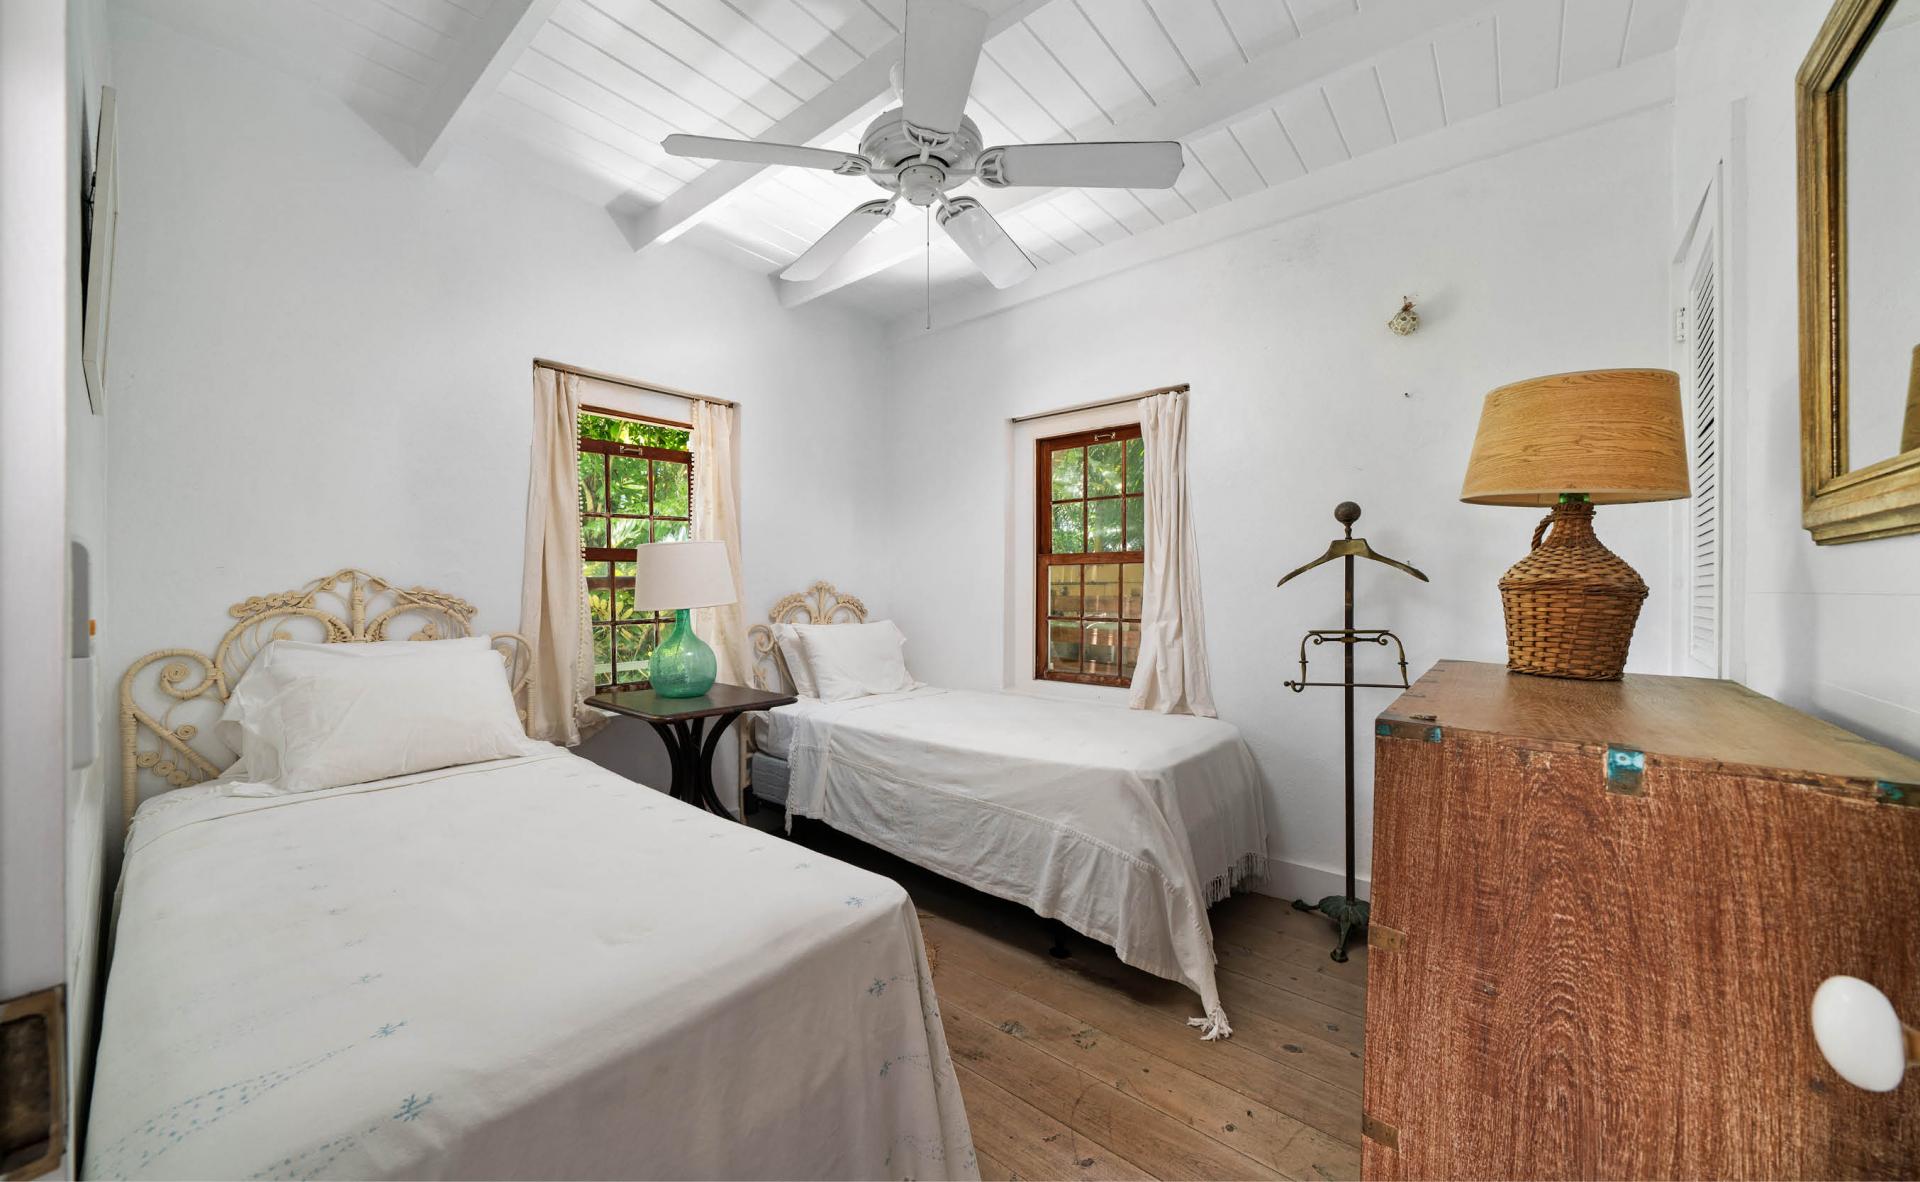 Inside an Enchanting 200-Year-Old Bahamian Cottage